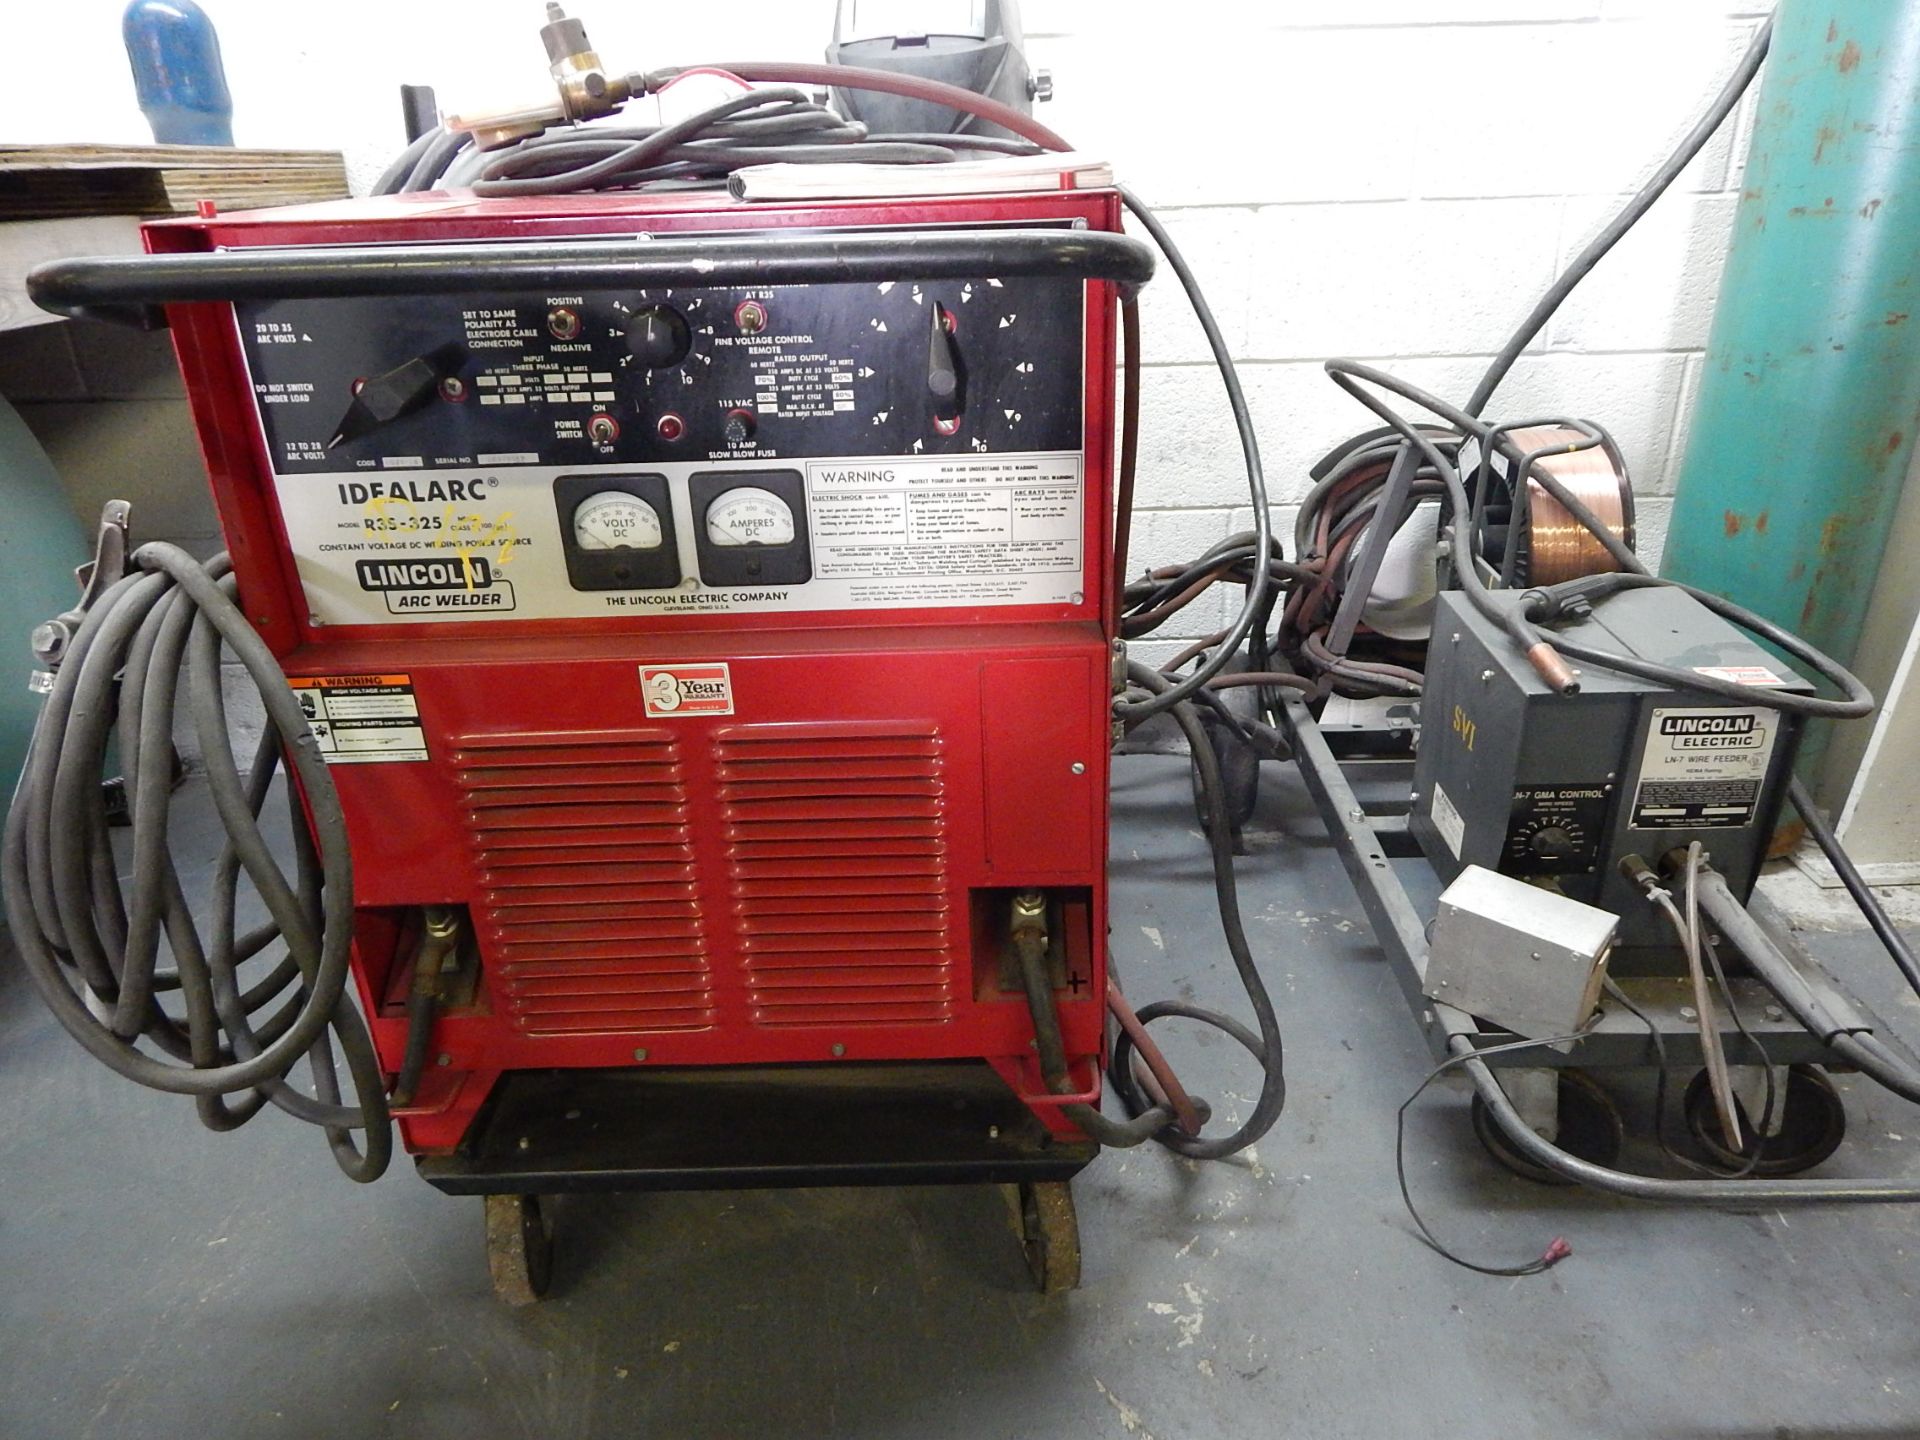 Lincoln Idealarc R3S-325 Mig Welder, s/n AC679812, with Lincoln LN-7 Wire Feeder and Mig Gun